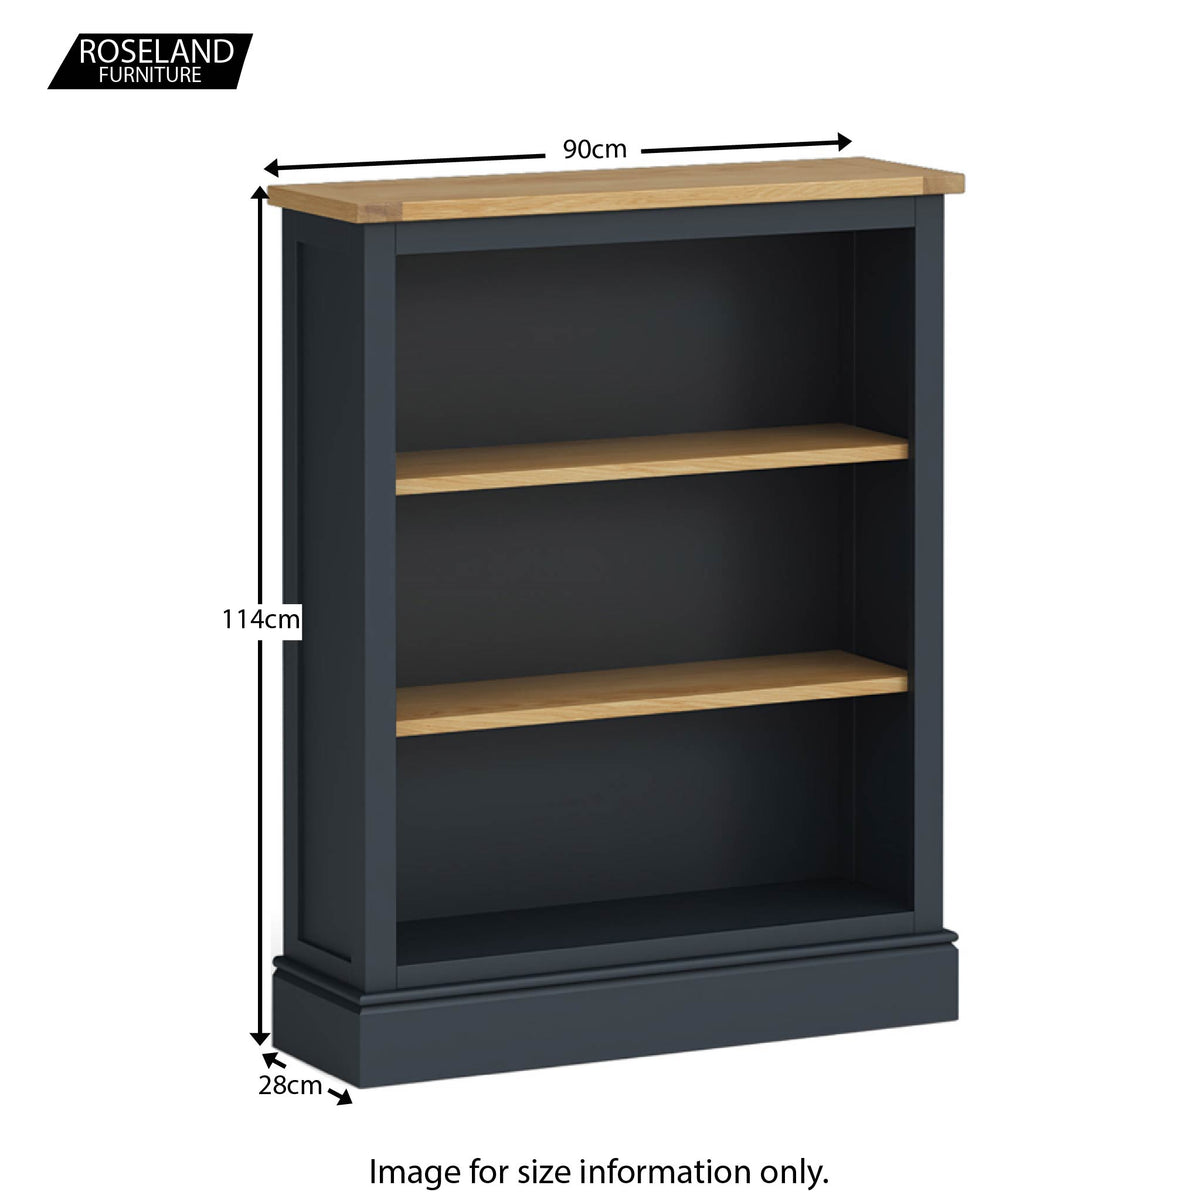 Chichester Small Bookcase in Charcoal - Size Guide